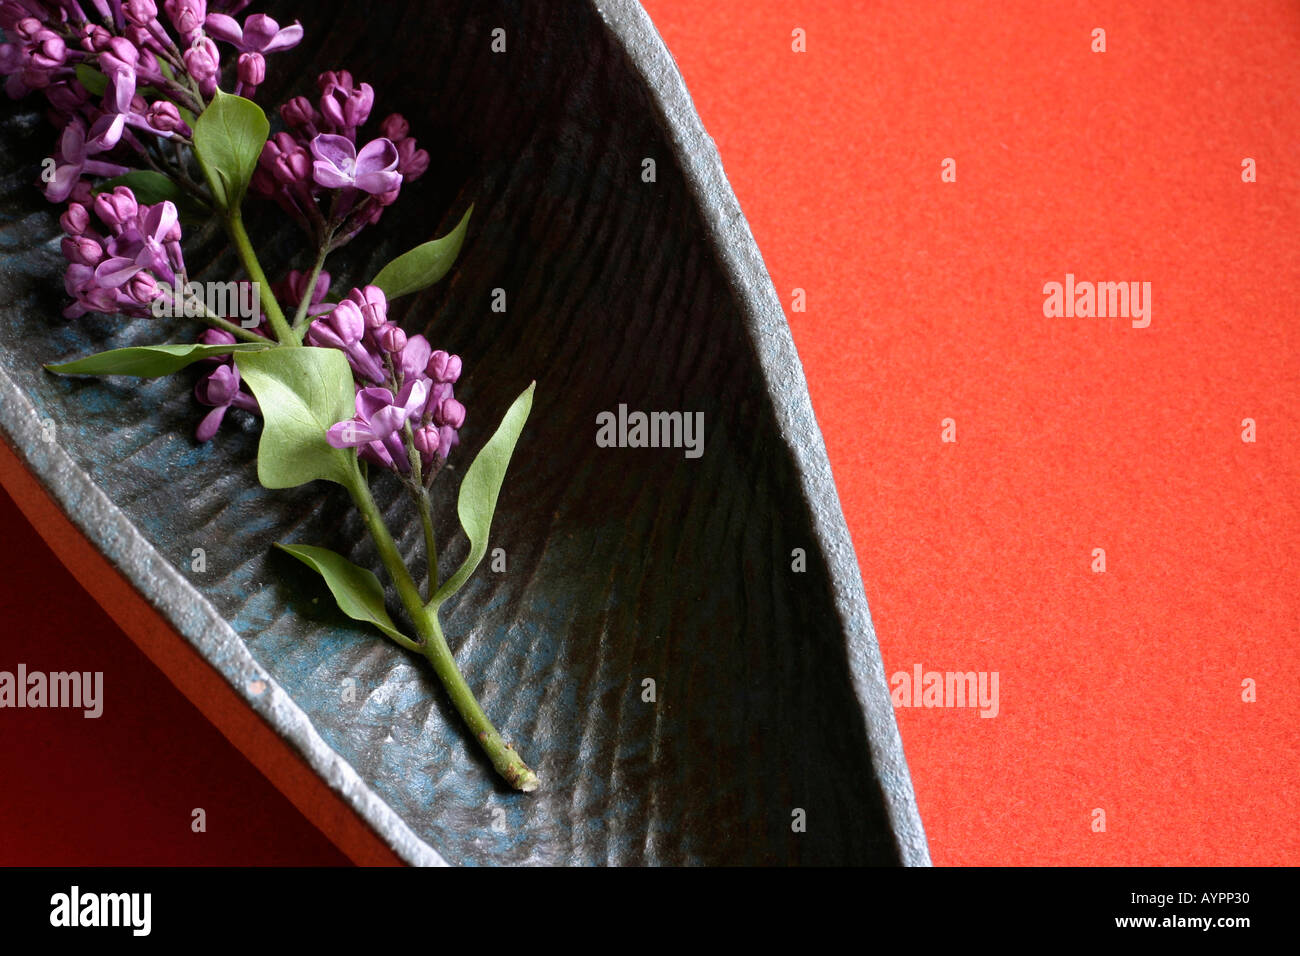 A bunch of lilac placed on a wooden tray Stock Photo